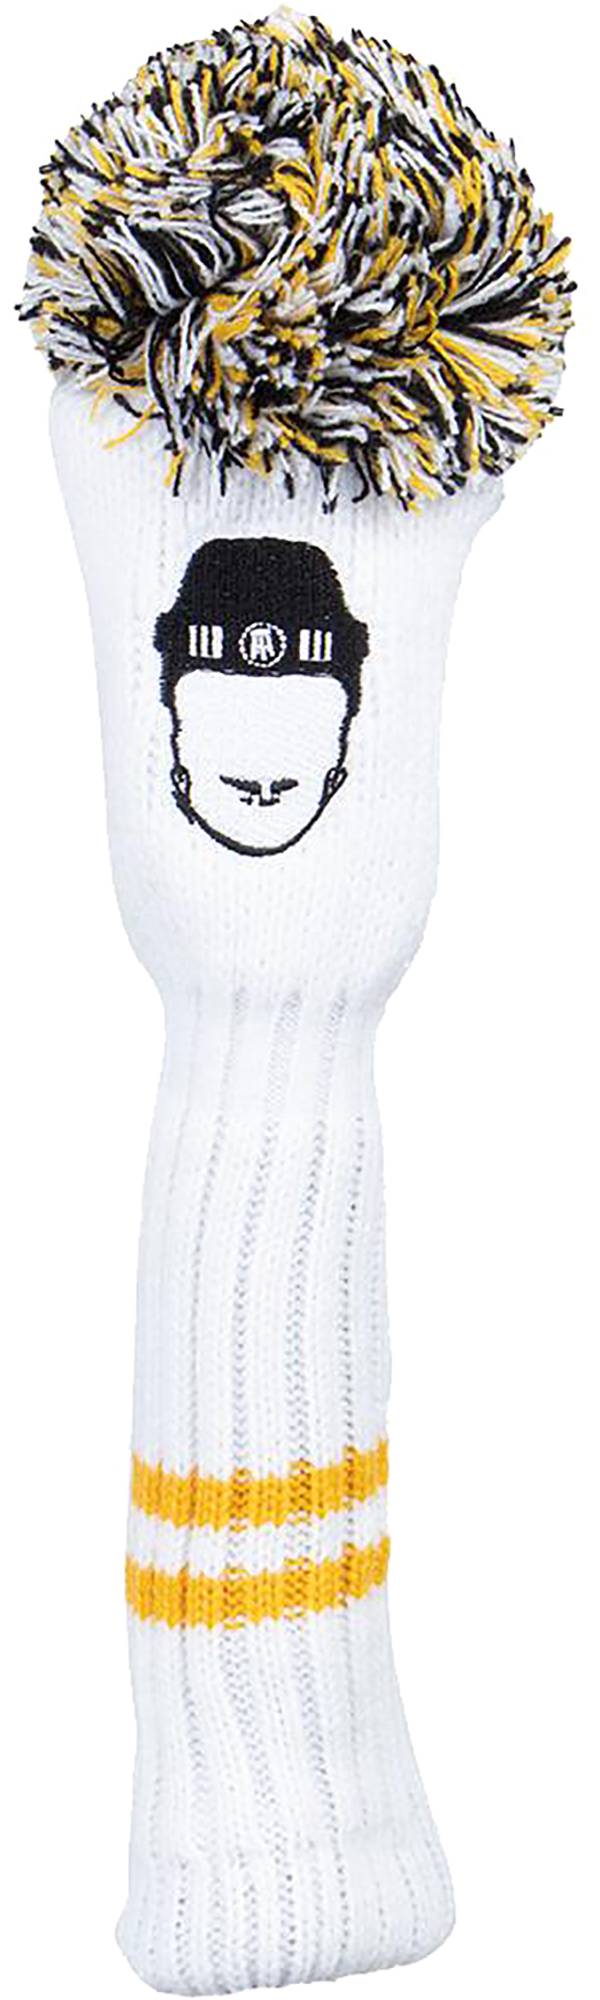 Barstool Sports Spittin' Chiclets Knit Hybrid Headcover product image